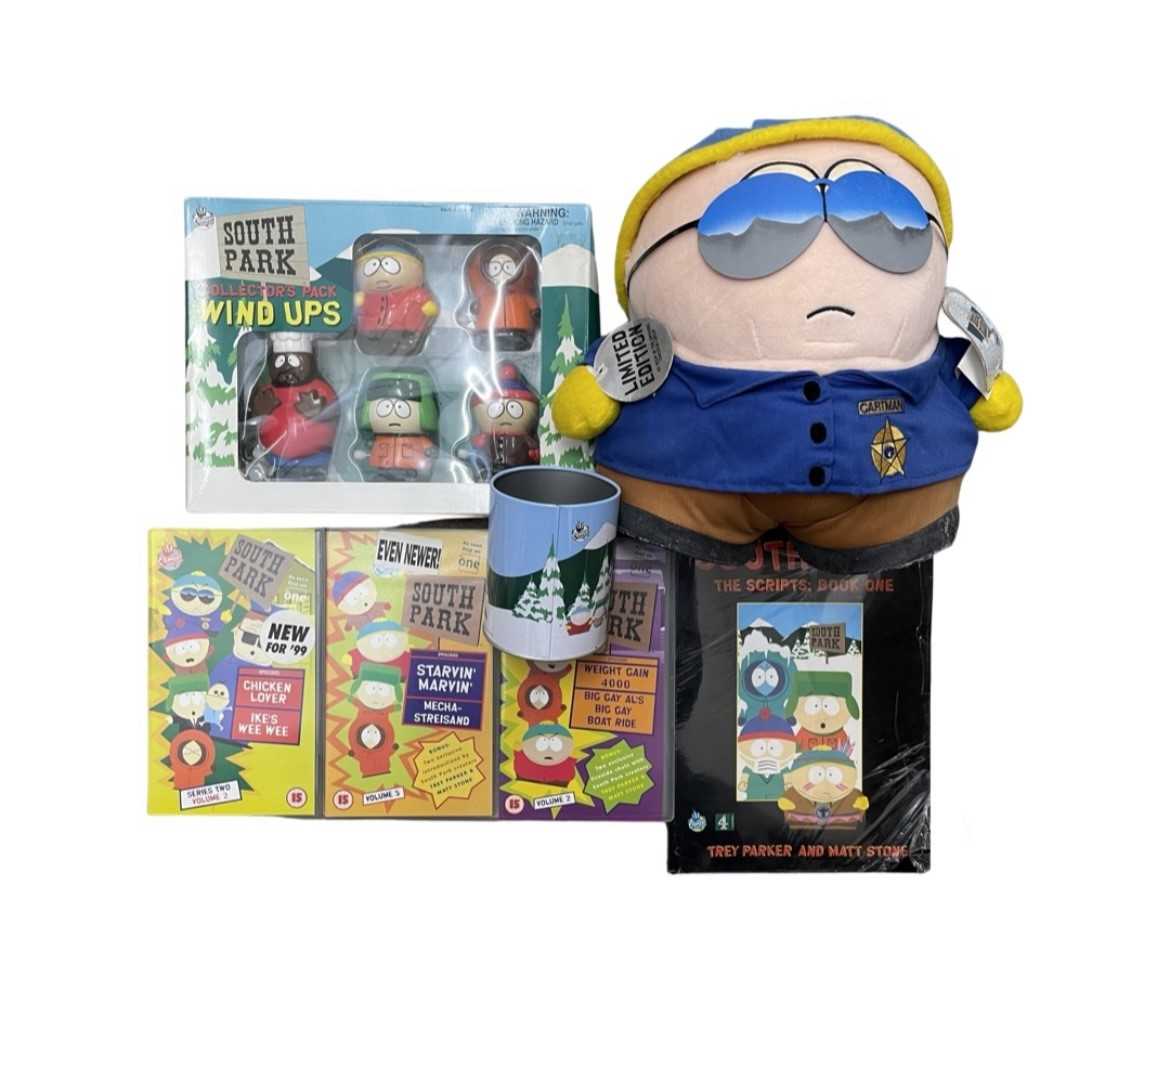 A collection of official South Park memorabilia, to include: - Limited Edition Officer Cartman plush